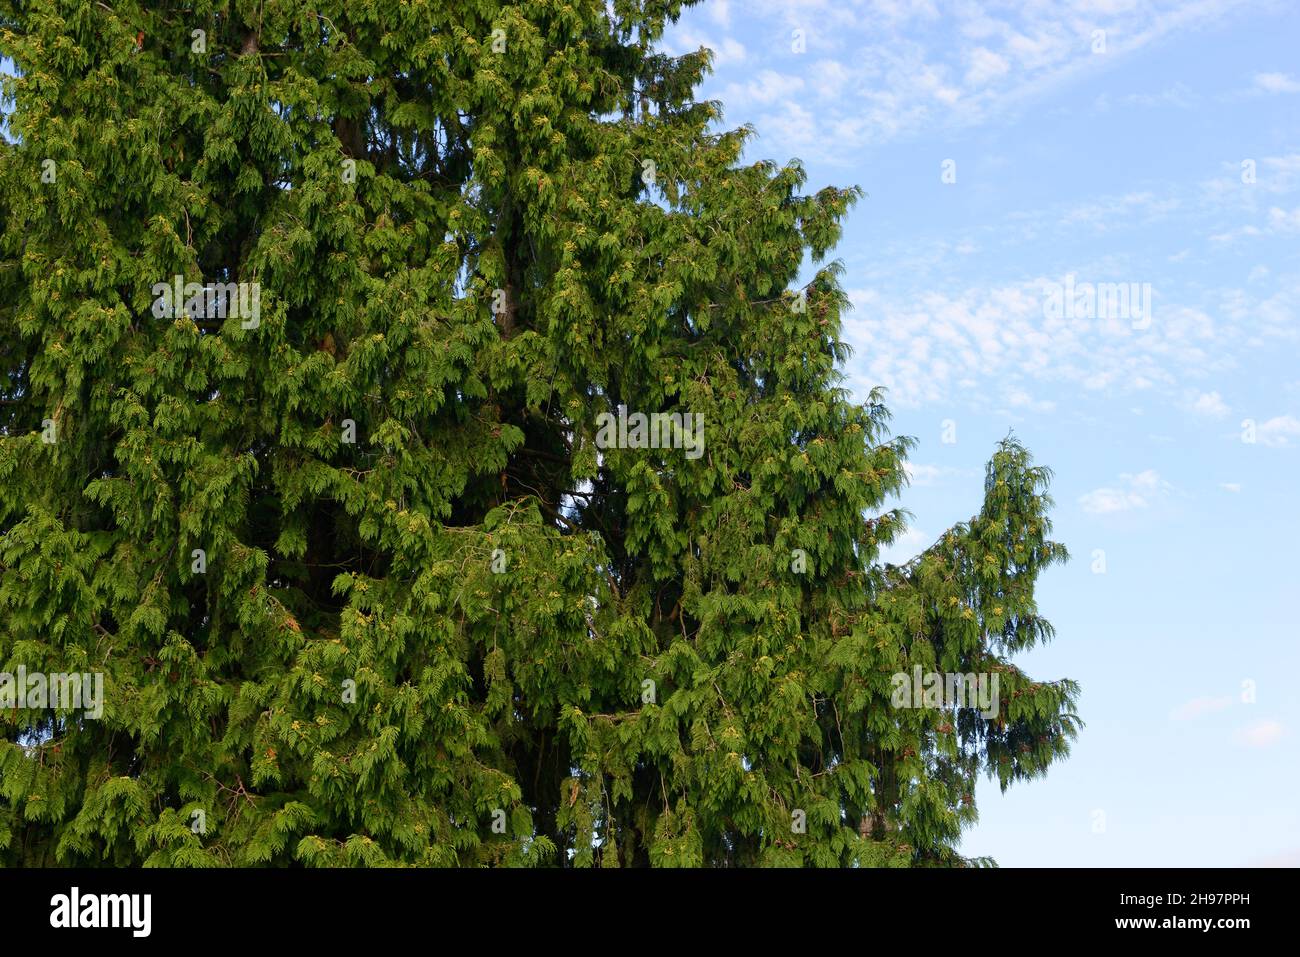 A conifer tree near St Albans cathedral, St Albans, UK Stock Photo